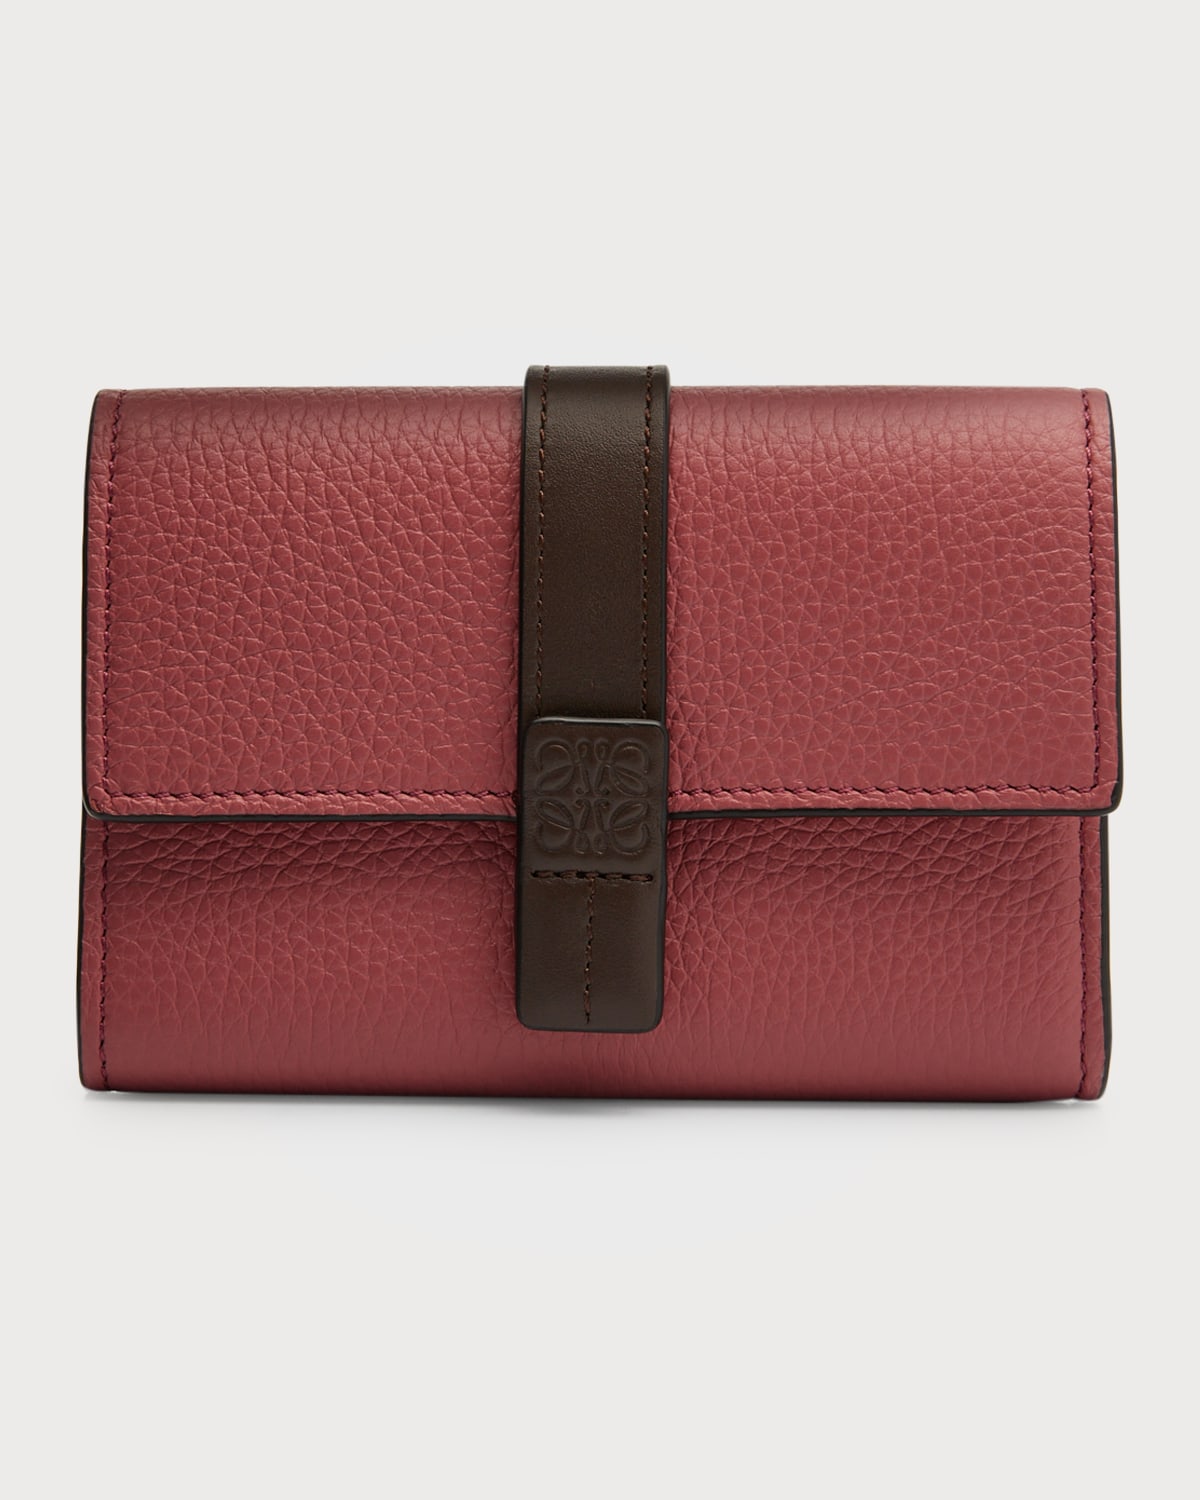 LOEWE SMALL TRIFOLD FLAP LEATHER WALLET